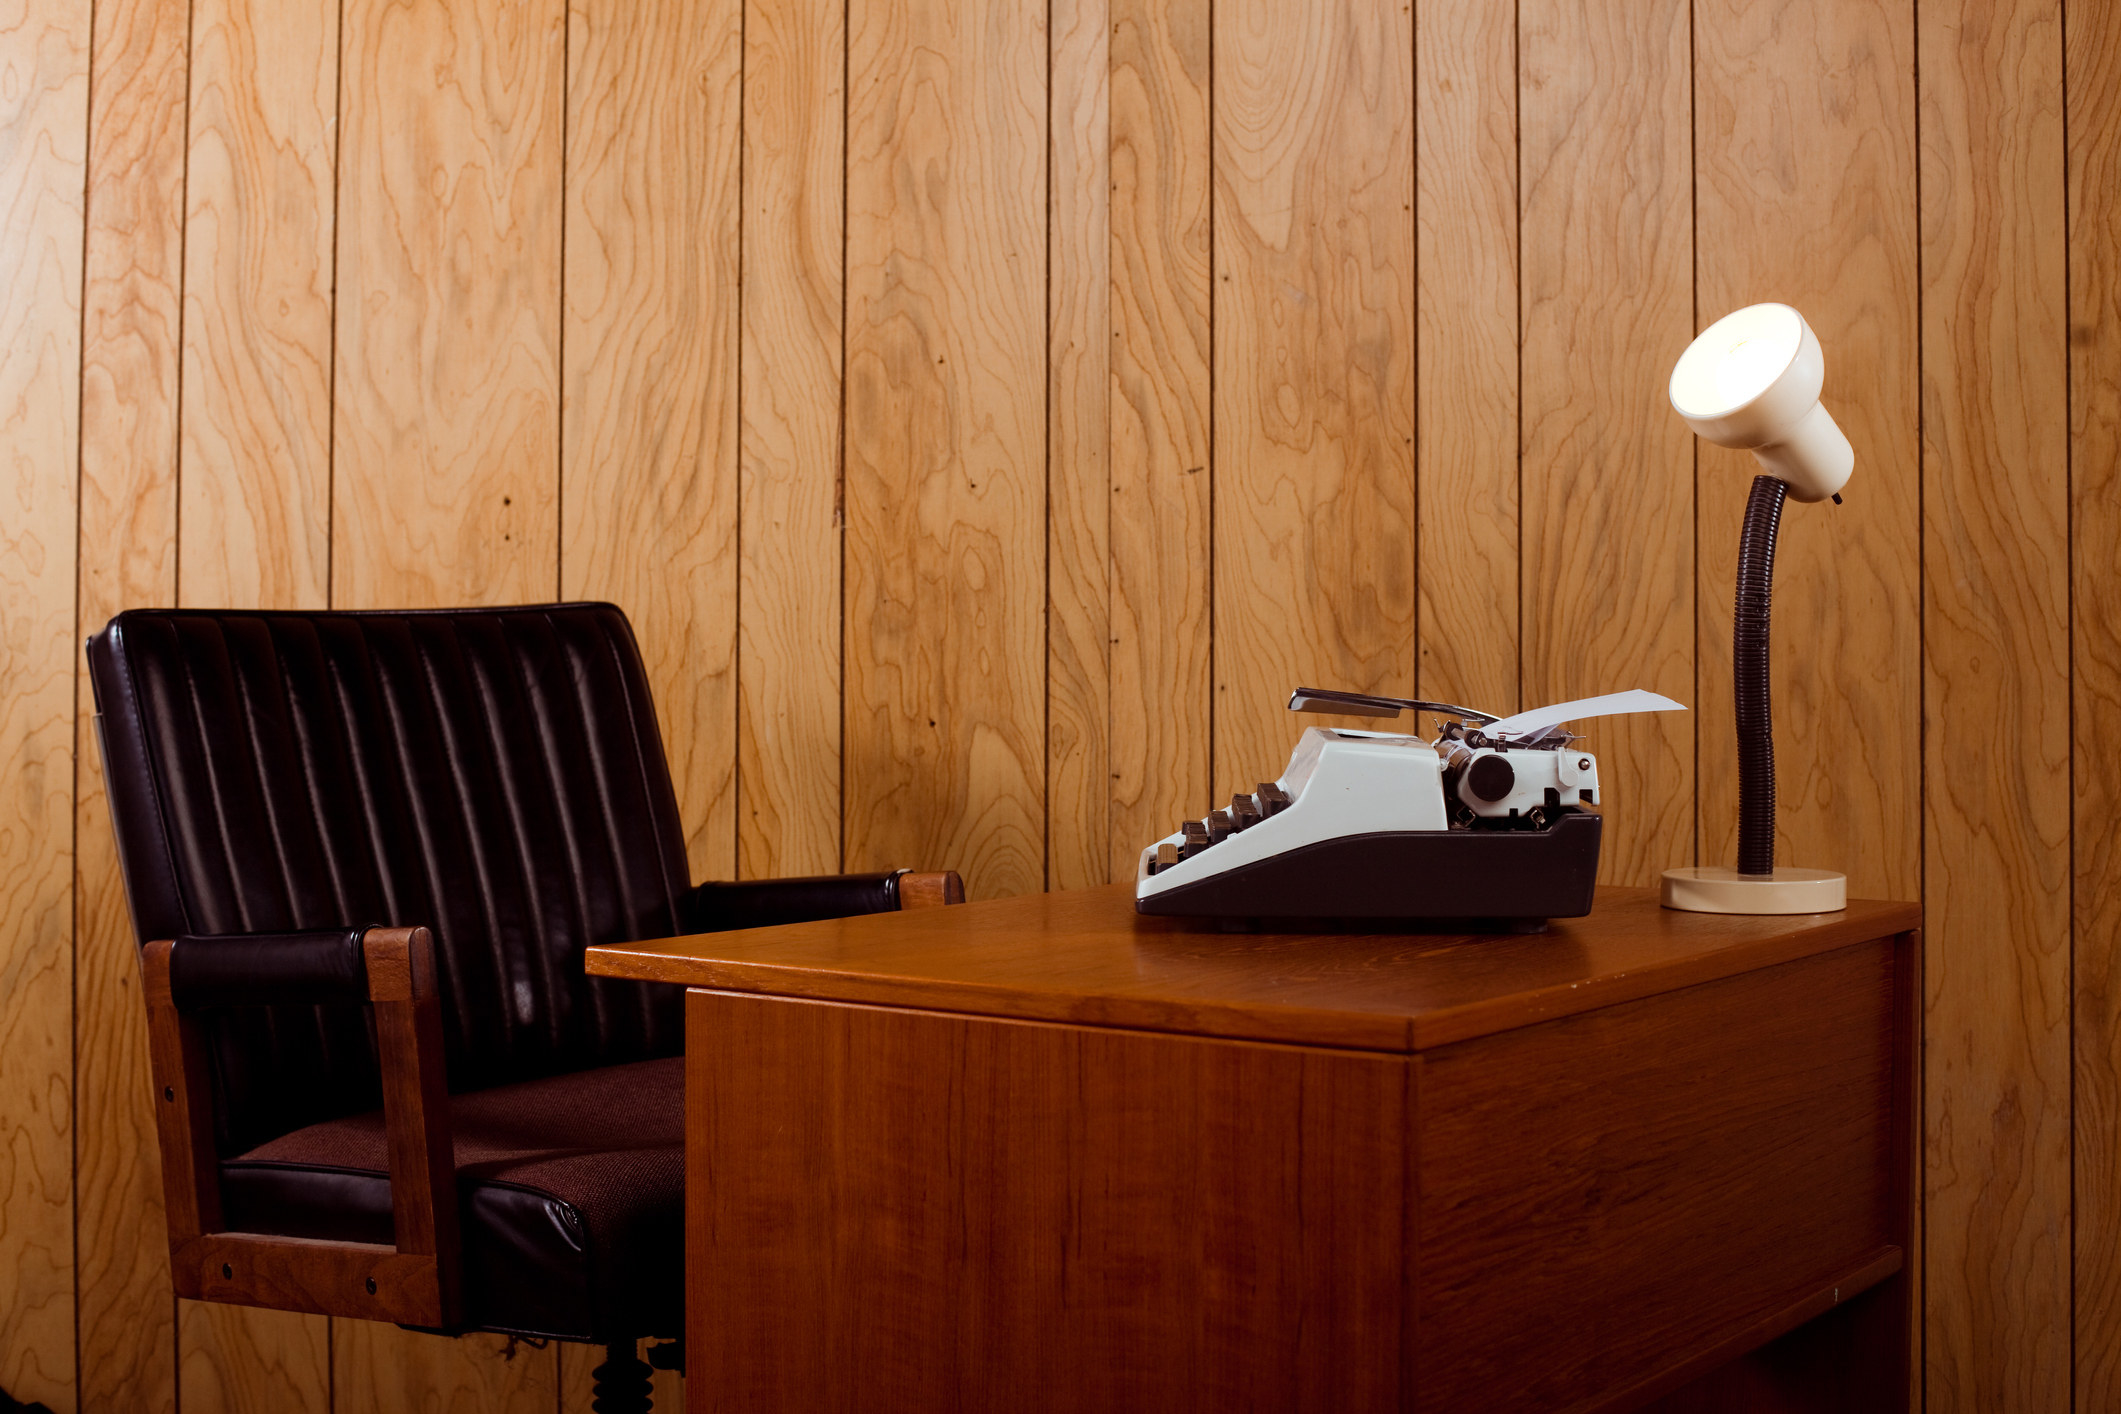 Vintage desk with a typewriter in a wood paneled room